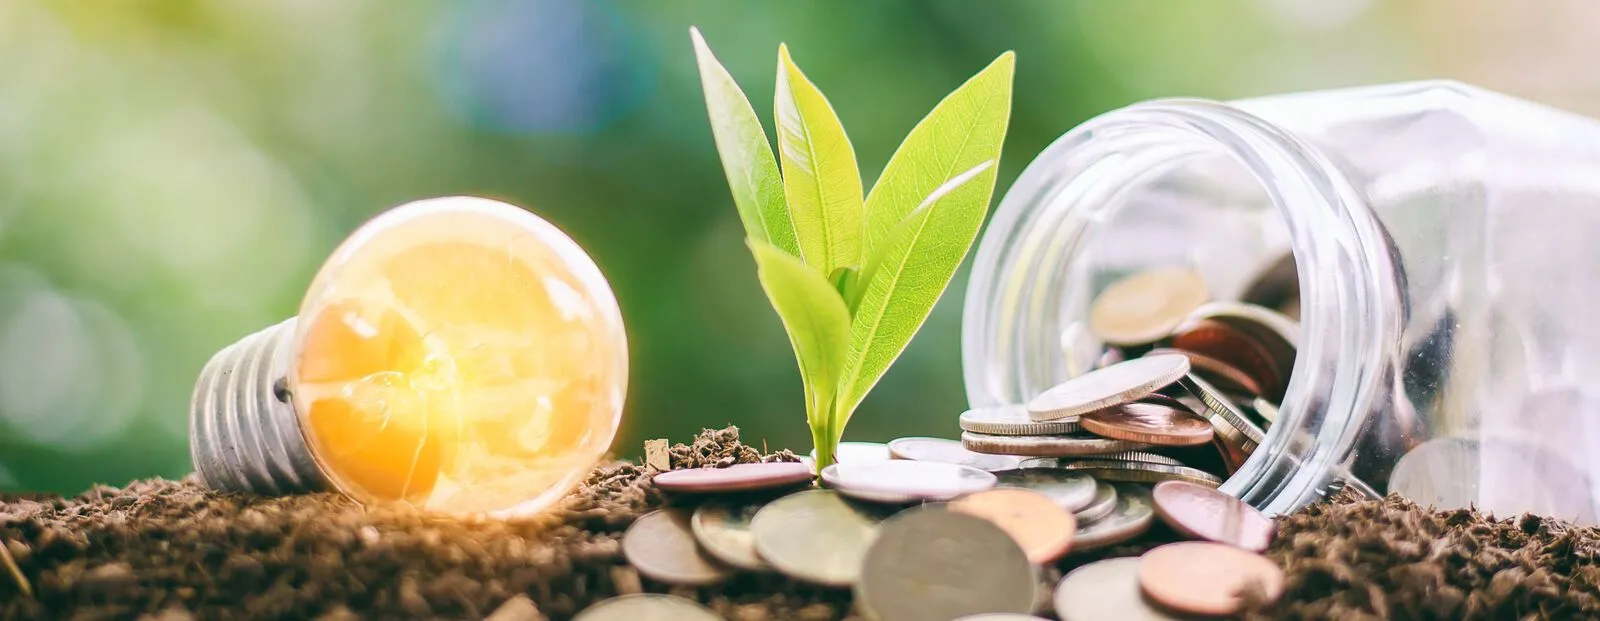 Glowing light bulb with small plant growing from soil and money coins in the glass jar.jpg